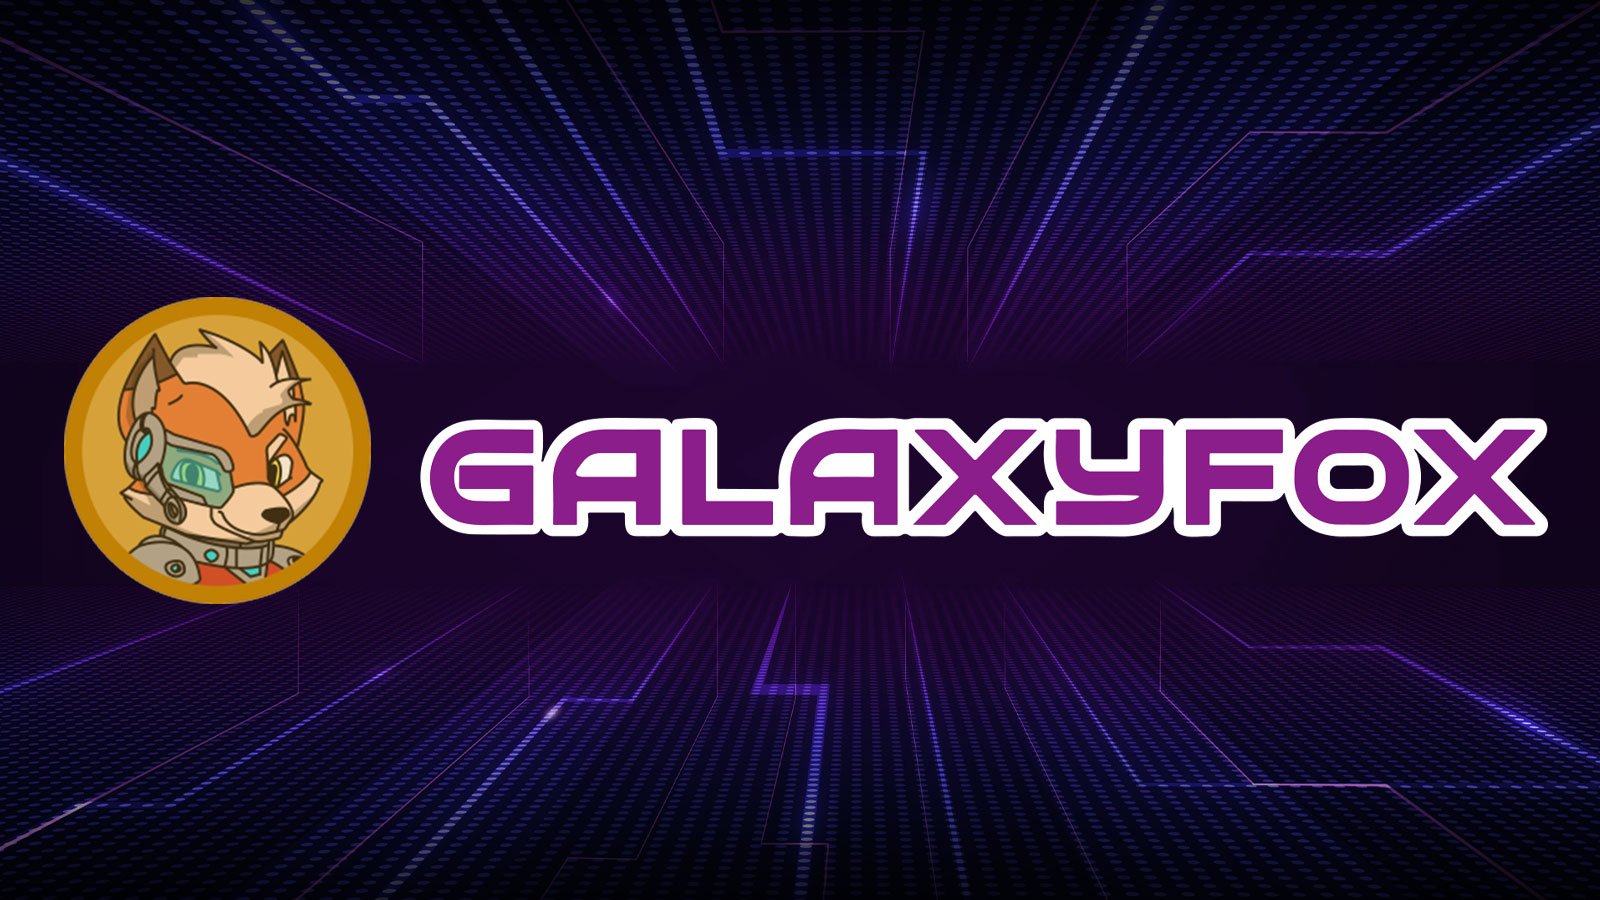 Pepe (PEPE) and Axie Infinity (AXS) Prices Gain Traction, Galaxy Fox (GFOX) Presale Stage 2 Kicking Off